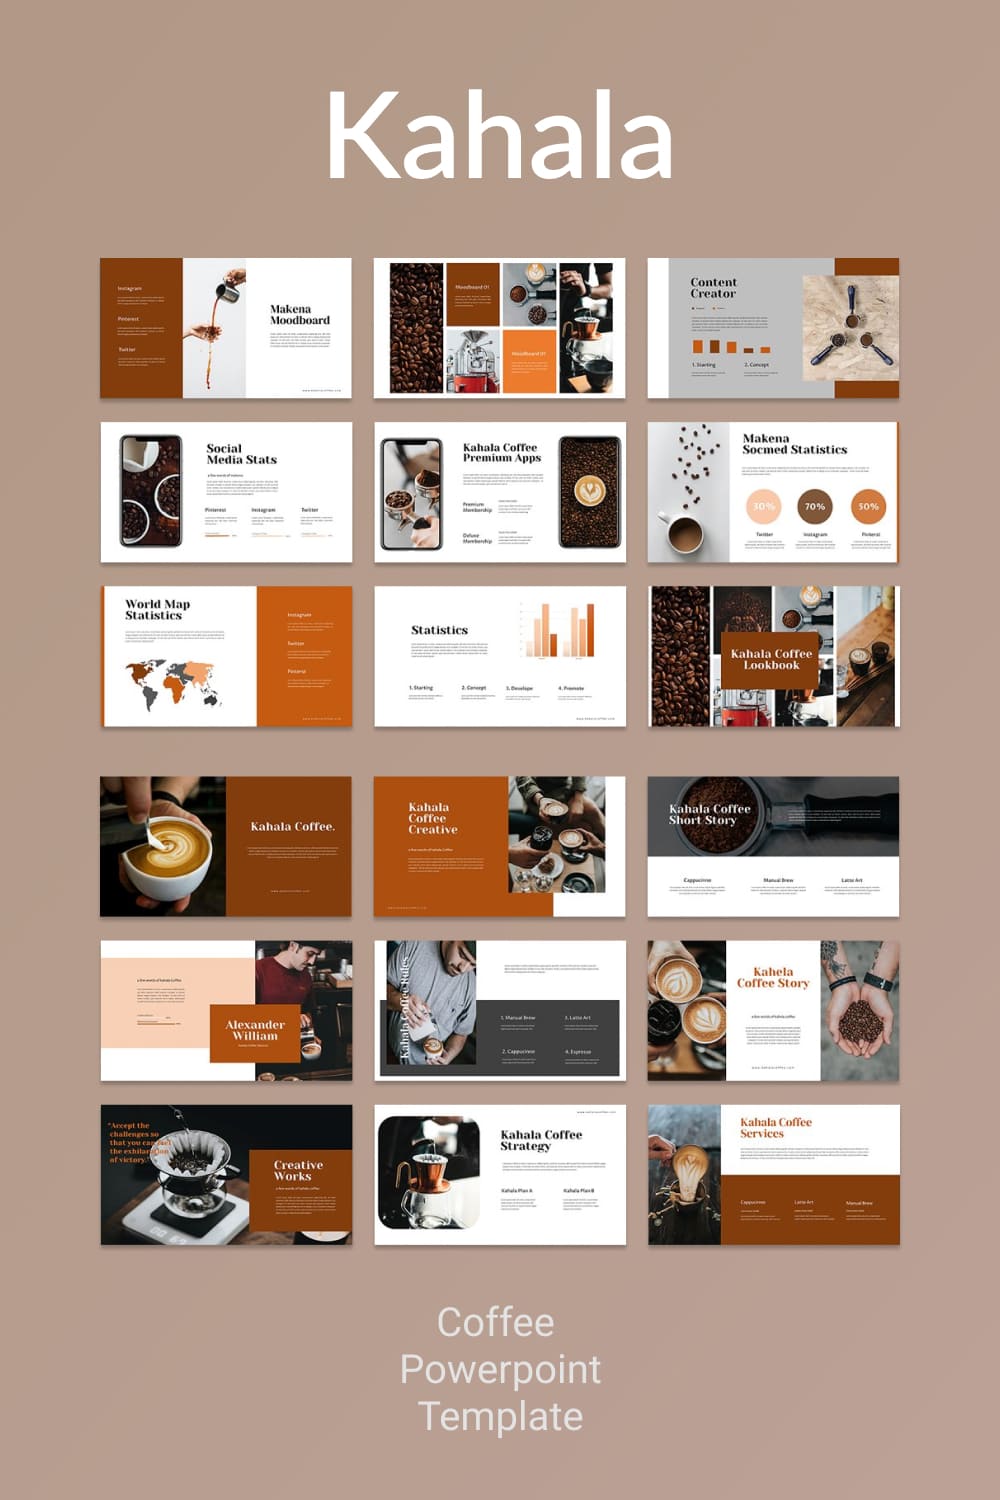 Kahala - Coffee Powerpoint Template - preview of Pinterest image.